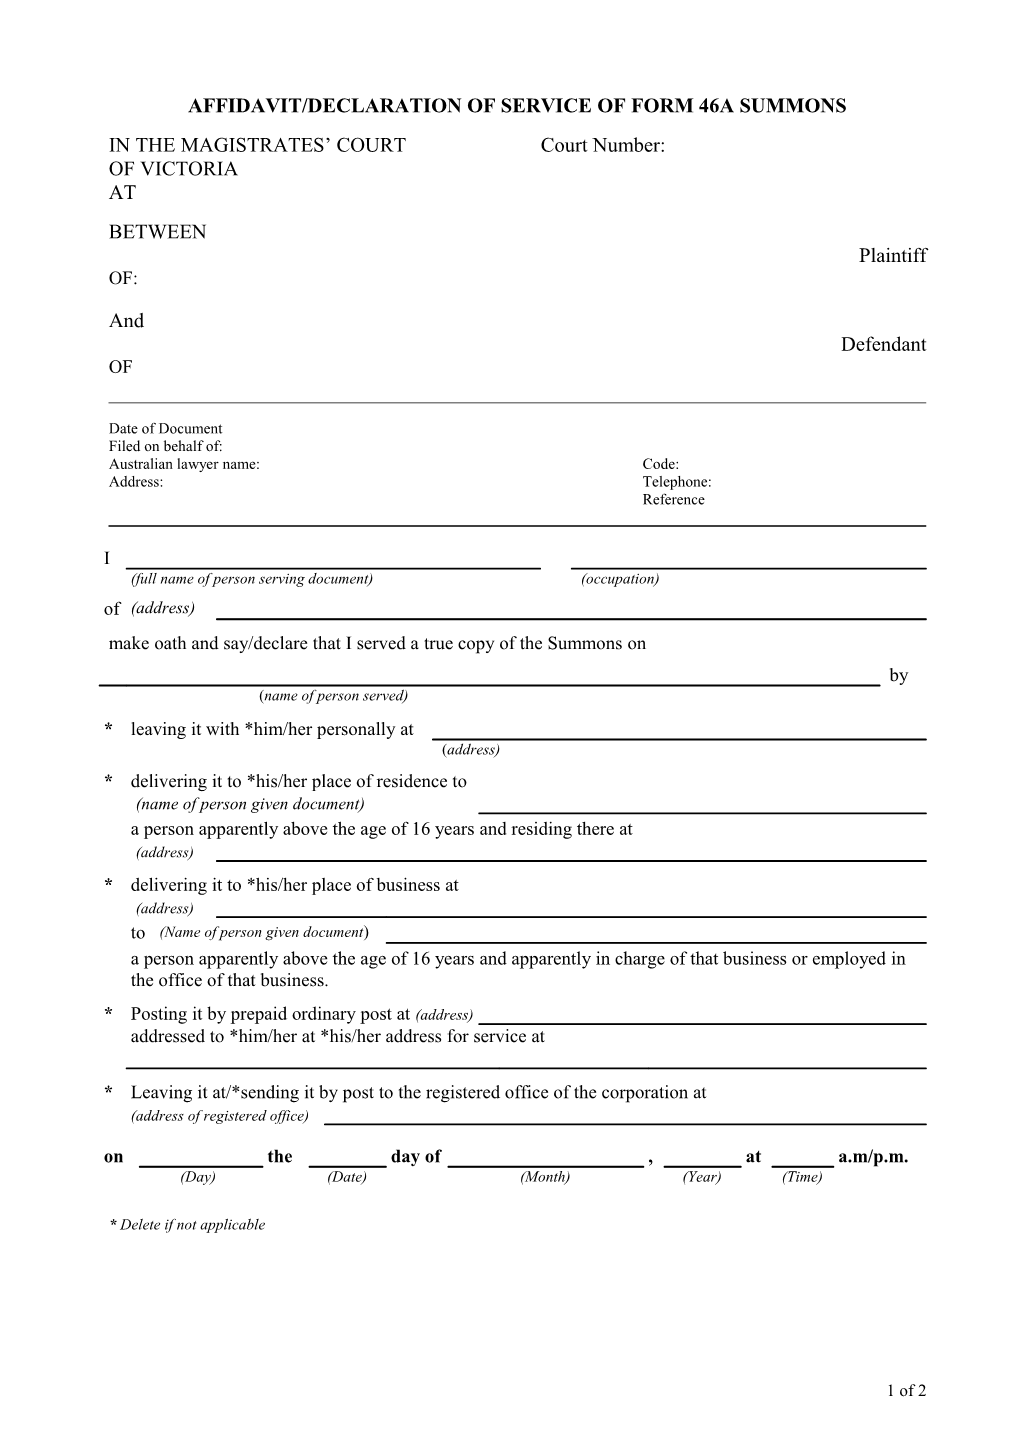 Affidavit of Service - Form 46A Summons (Word 72KB - 2 Pages)